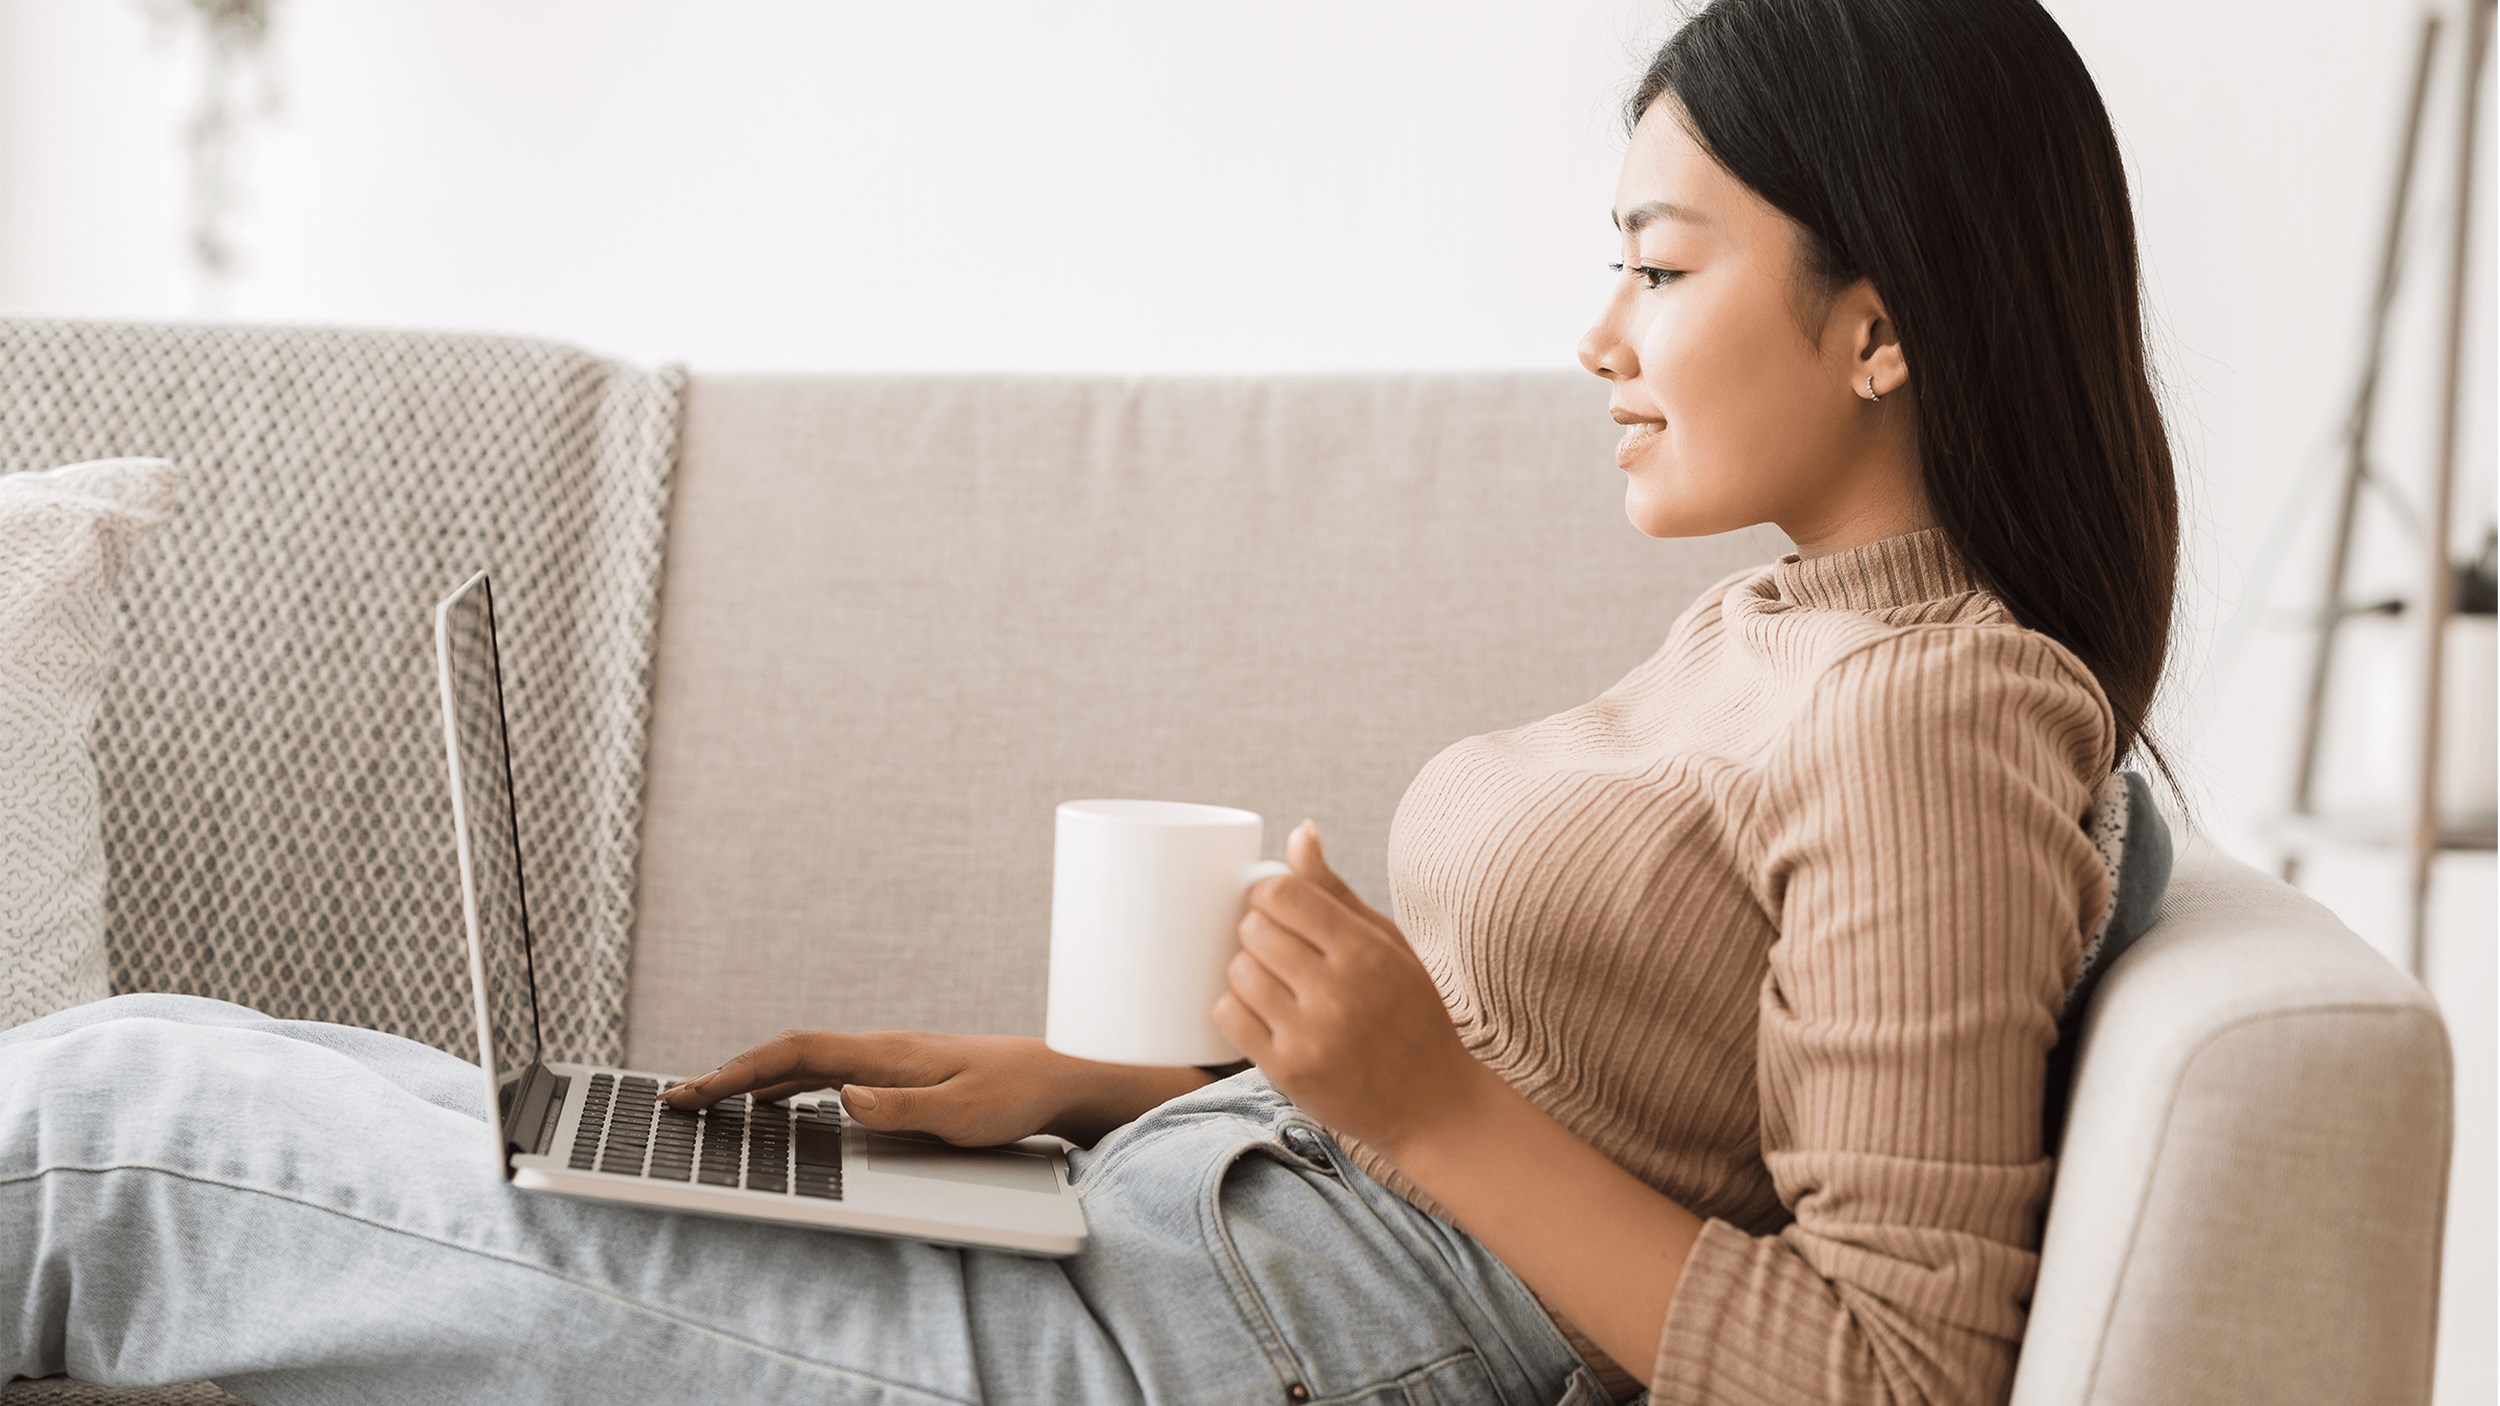 woman sitting down using social ecommerce